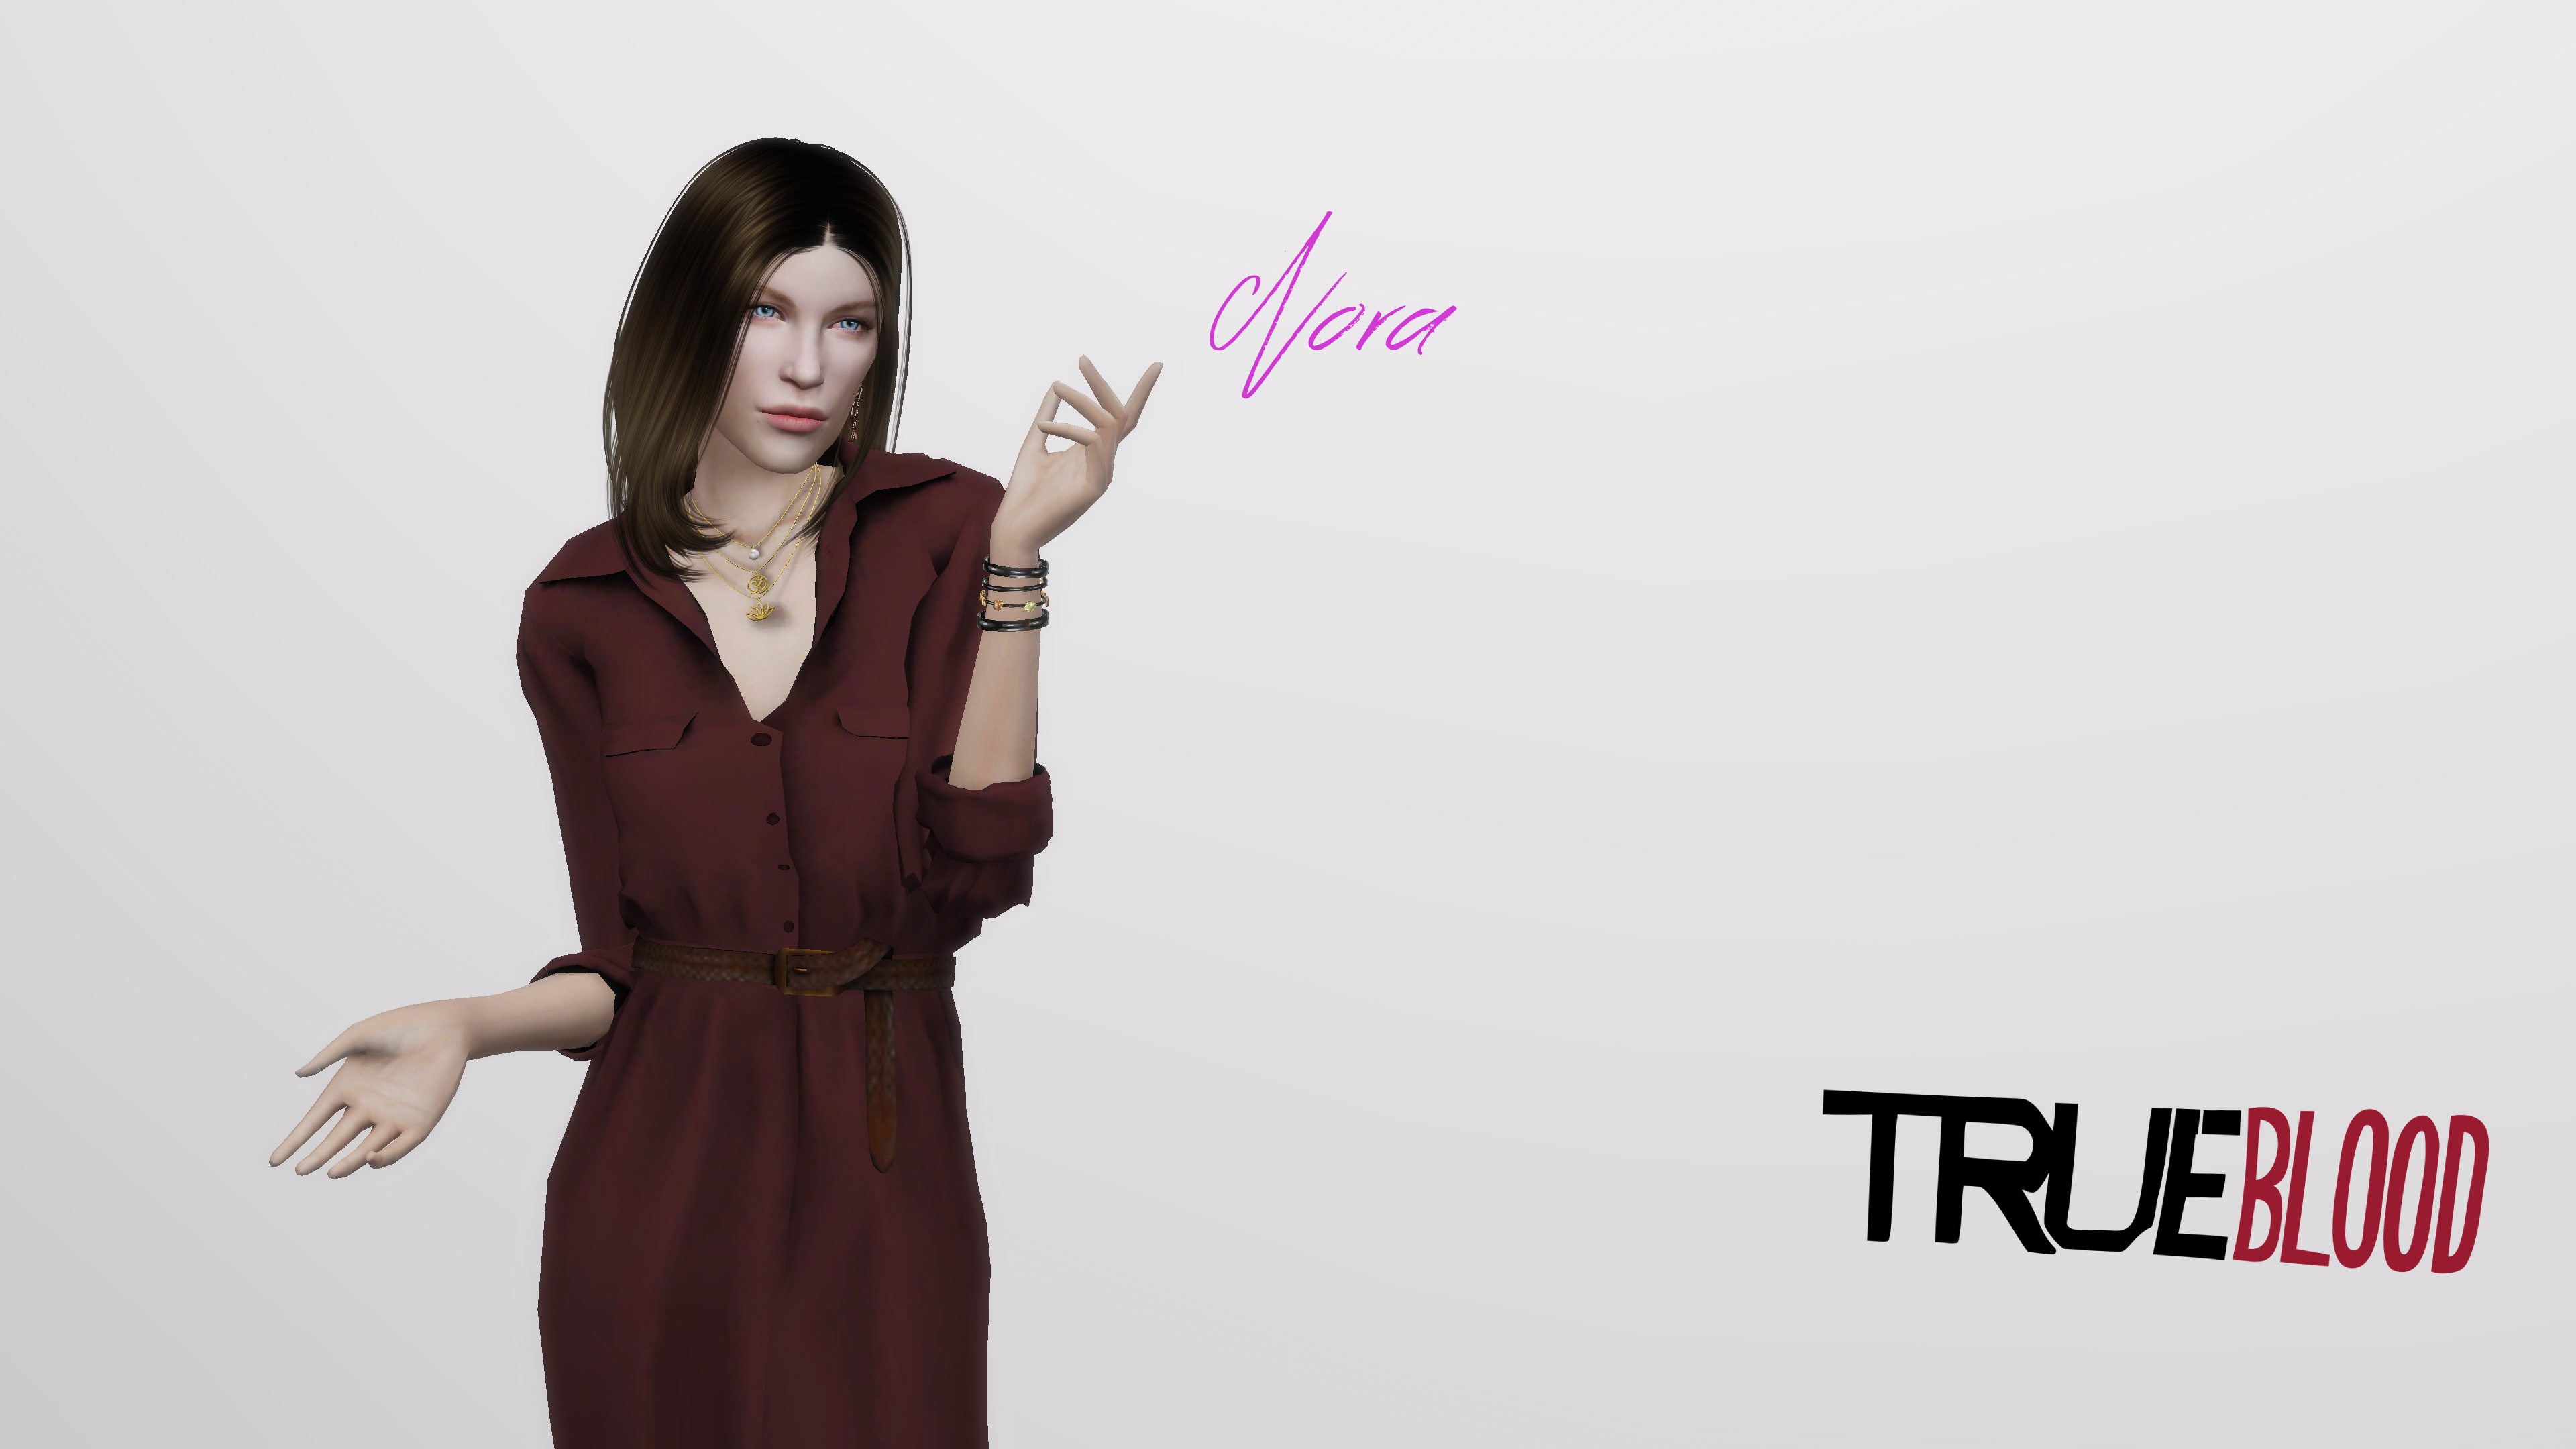 Thesimreaper Exclusive Tier 3 Packs Featuring Game Of Thrones